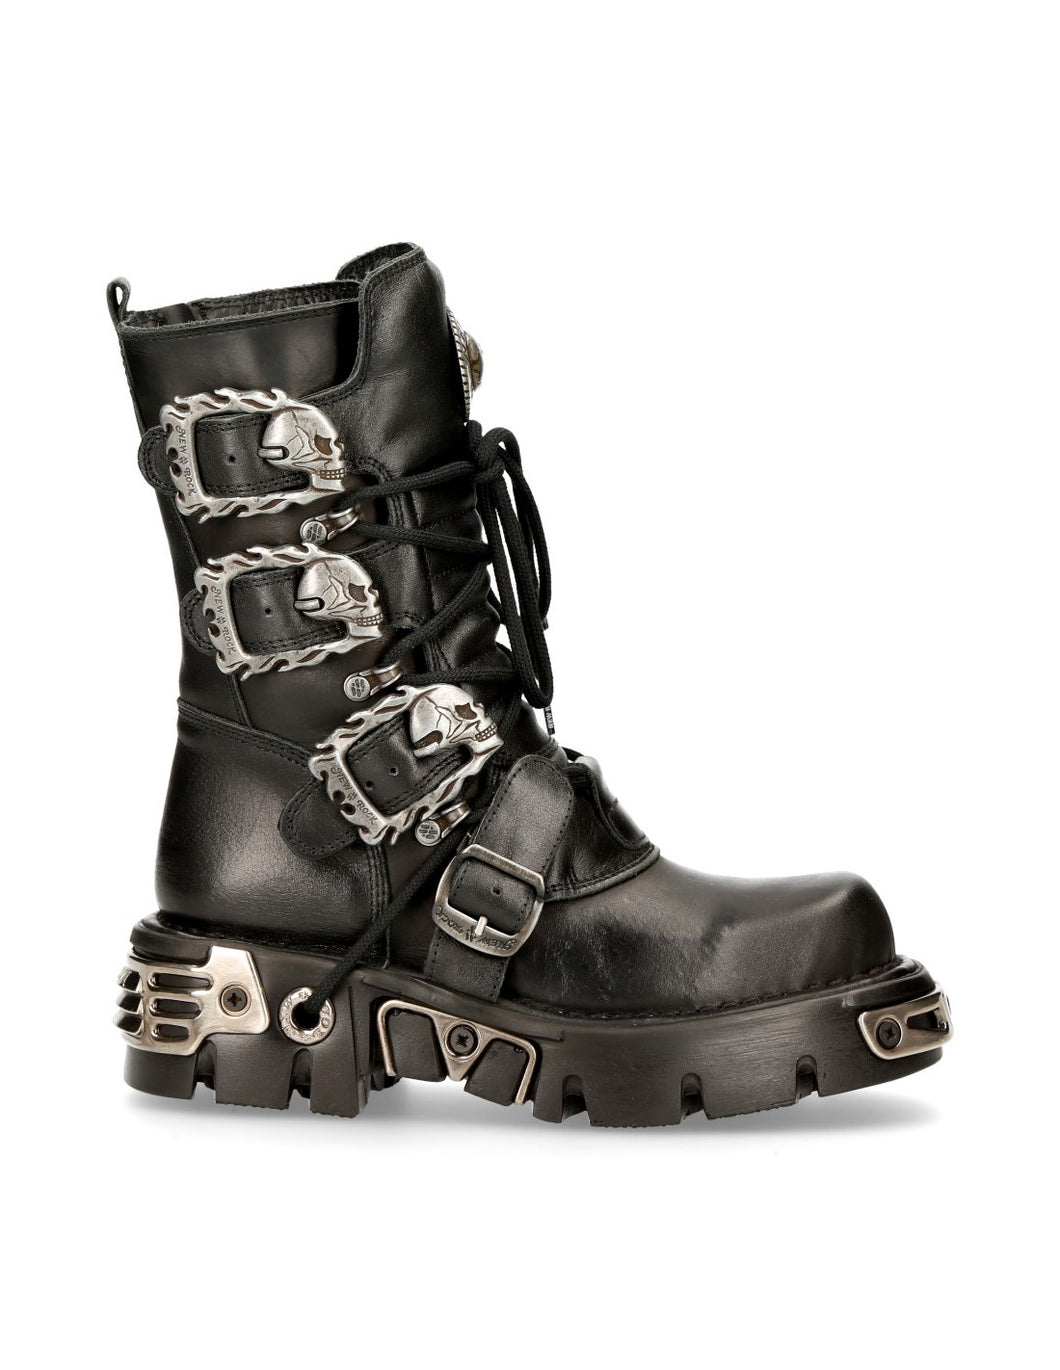 New Rock Shoes Shoes Boots Boots M.391-S1 Biker Boots Gothic Real Leather Skull